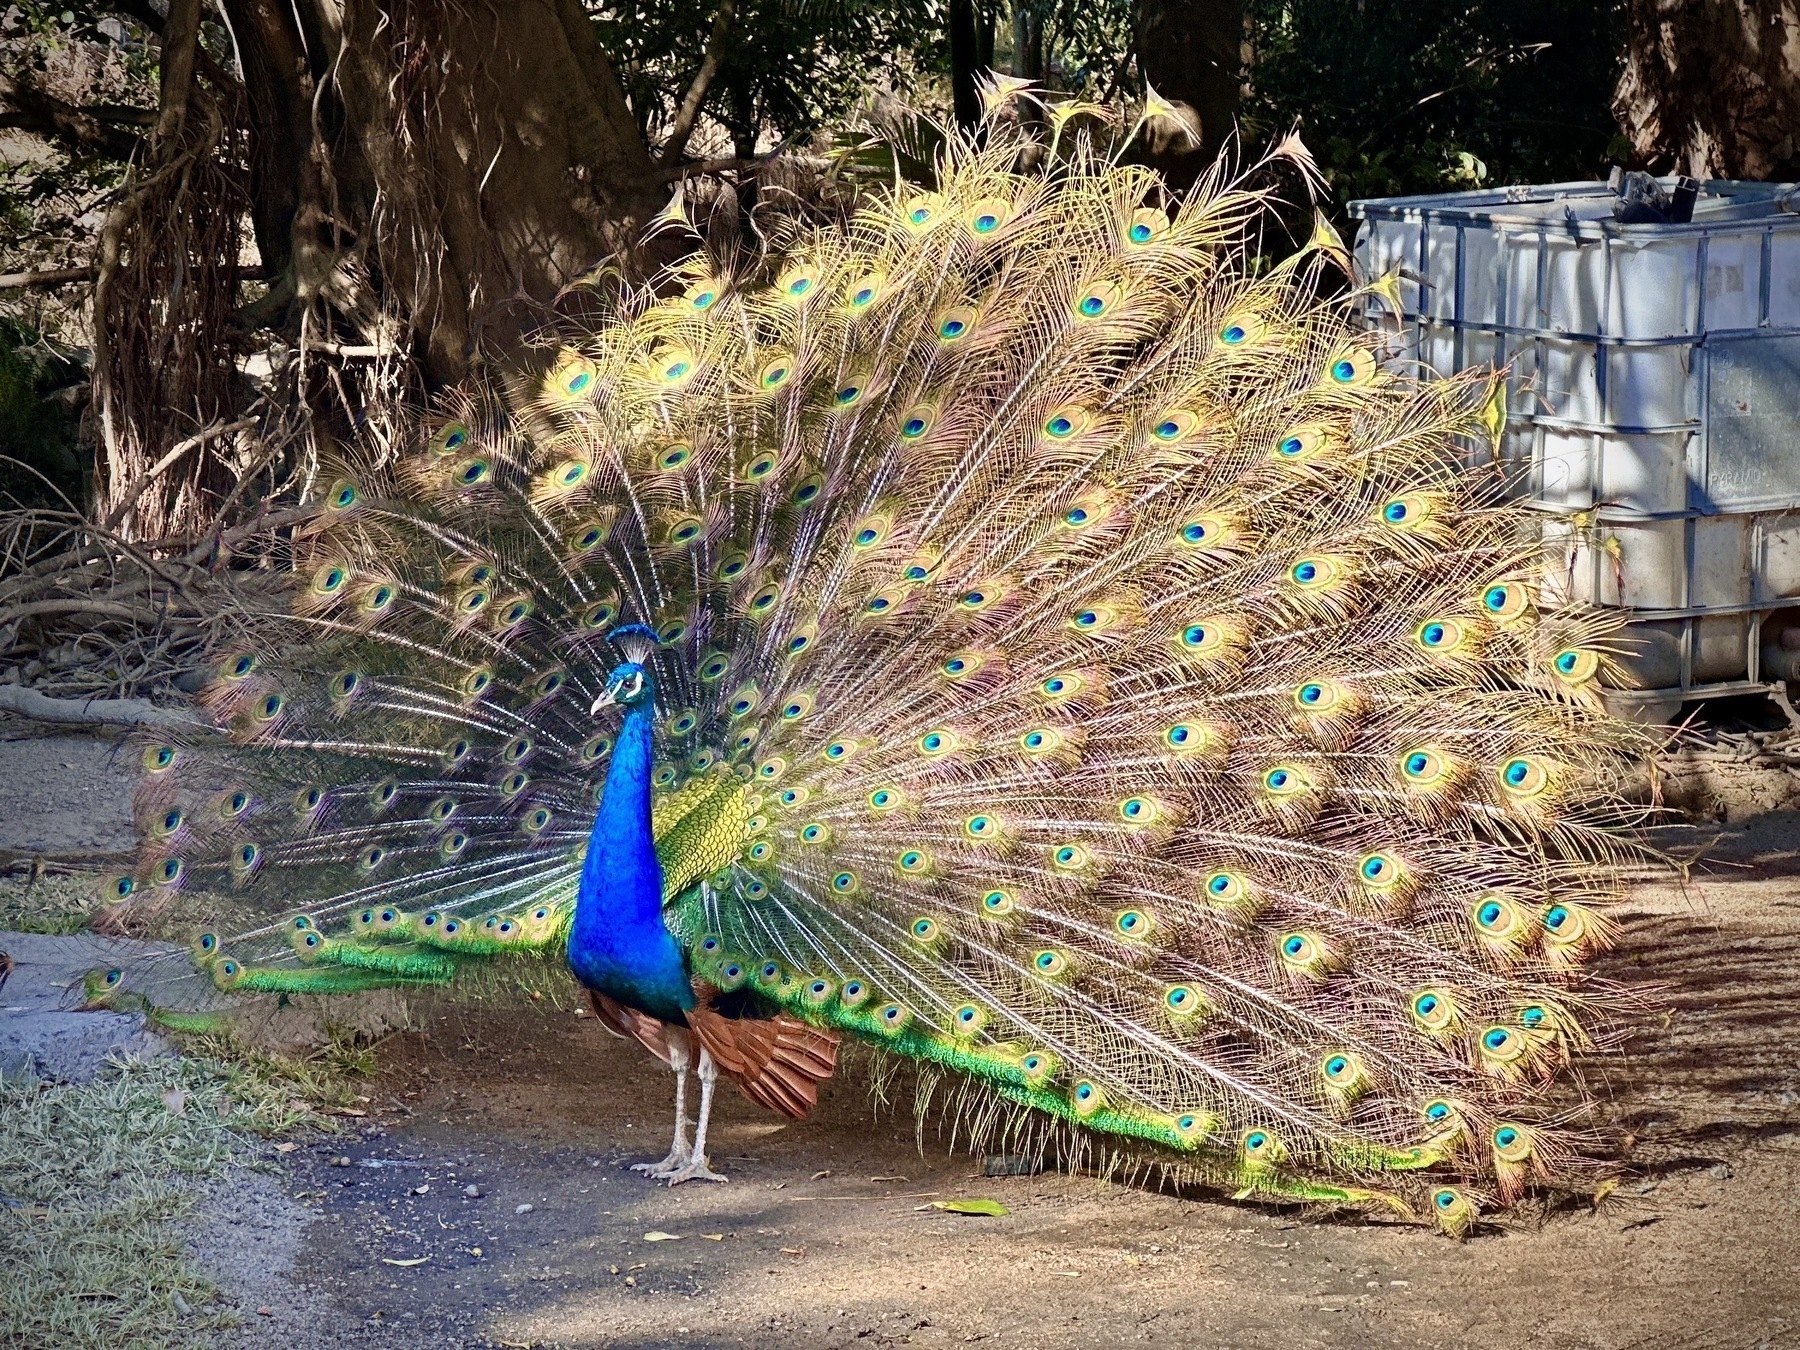 A peacock with his handsome fan tail on full display.